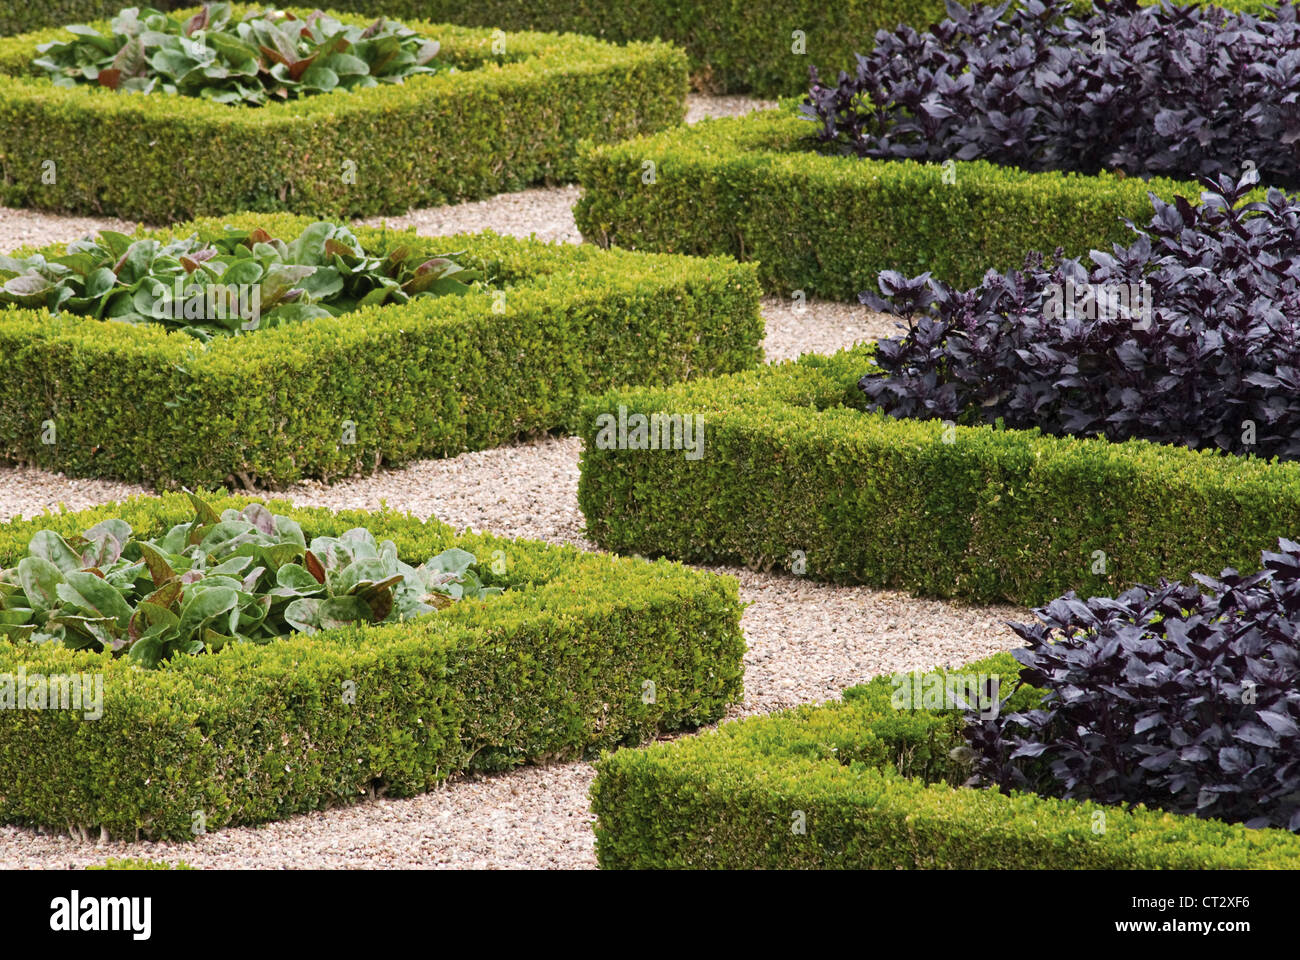 Buxus sempervirens, Box, common hedge enclosing vegetable in a formal garden at Villandry in France. Stock Photo